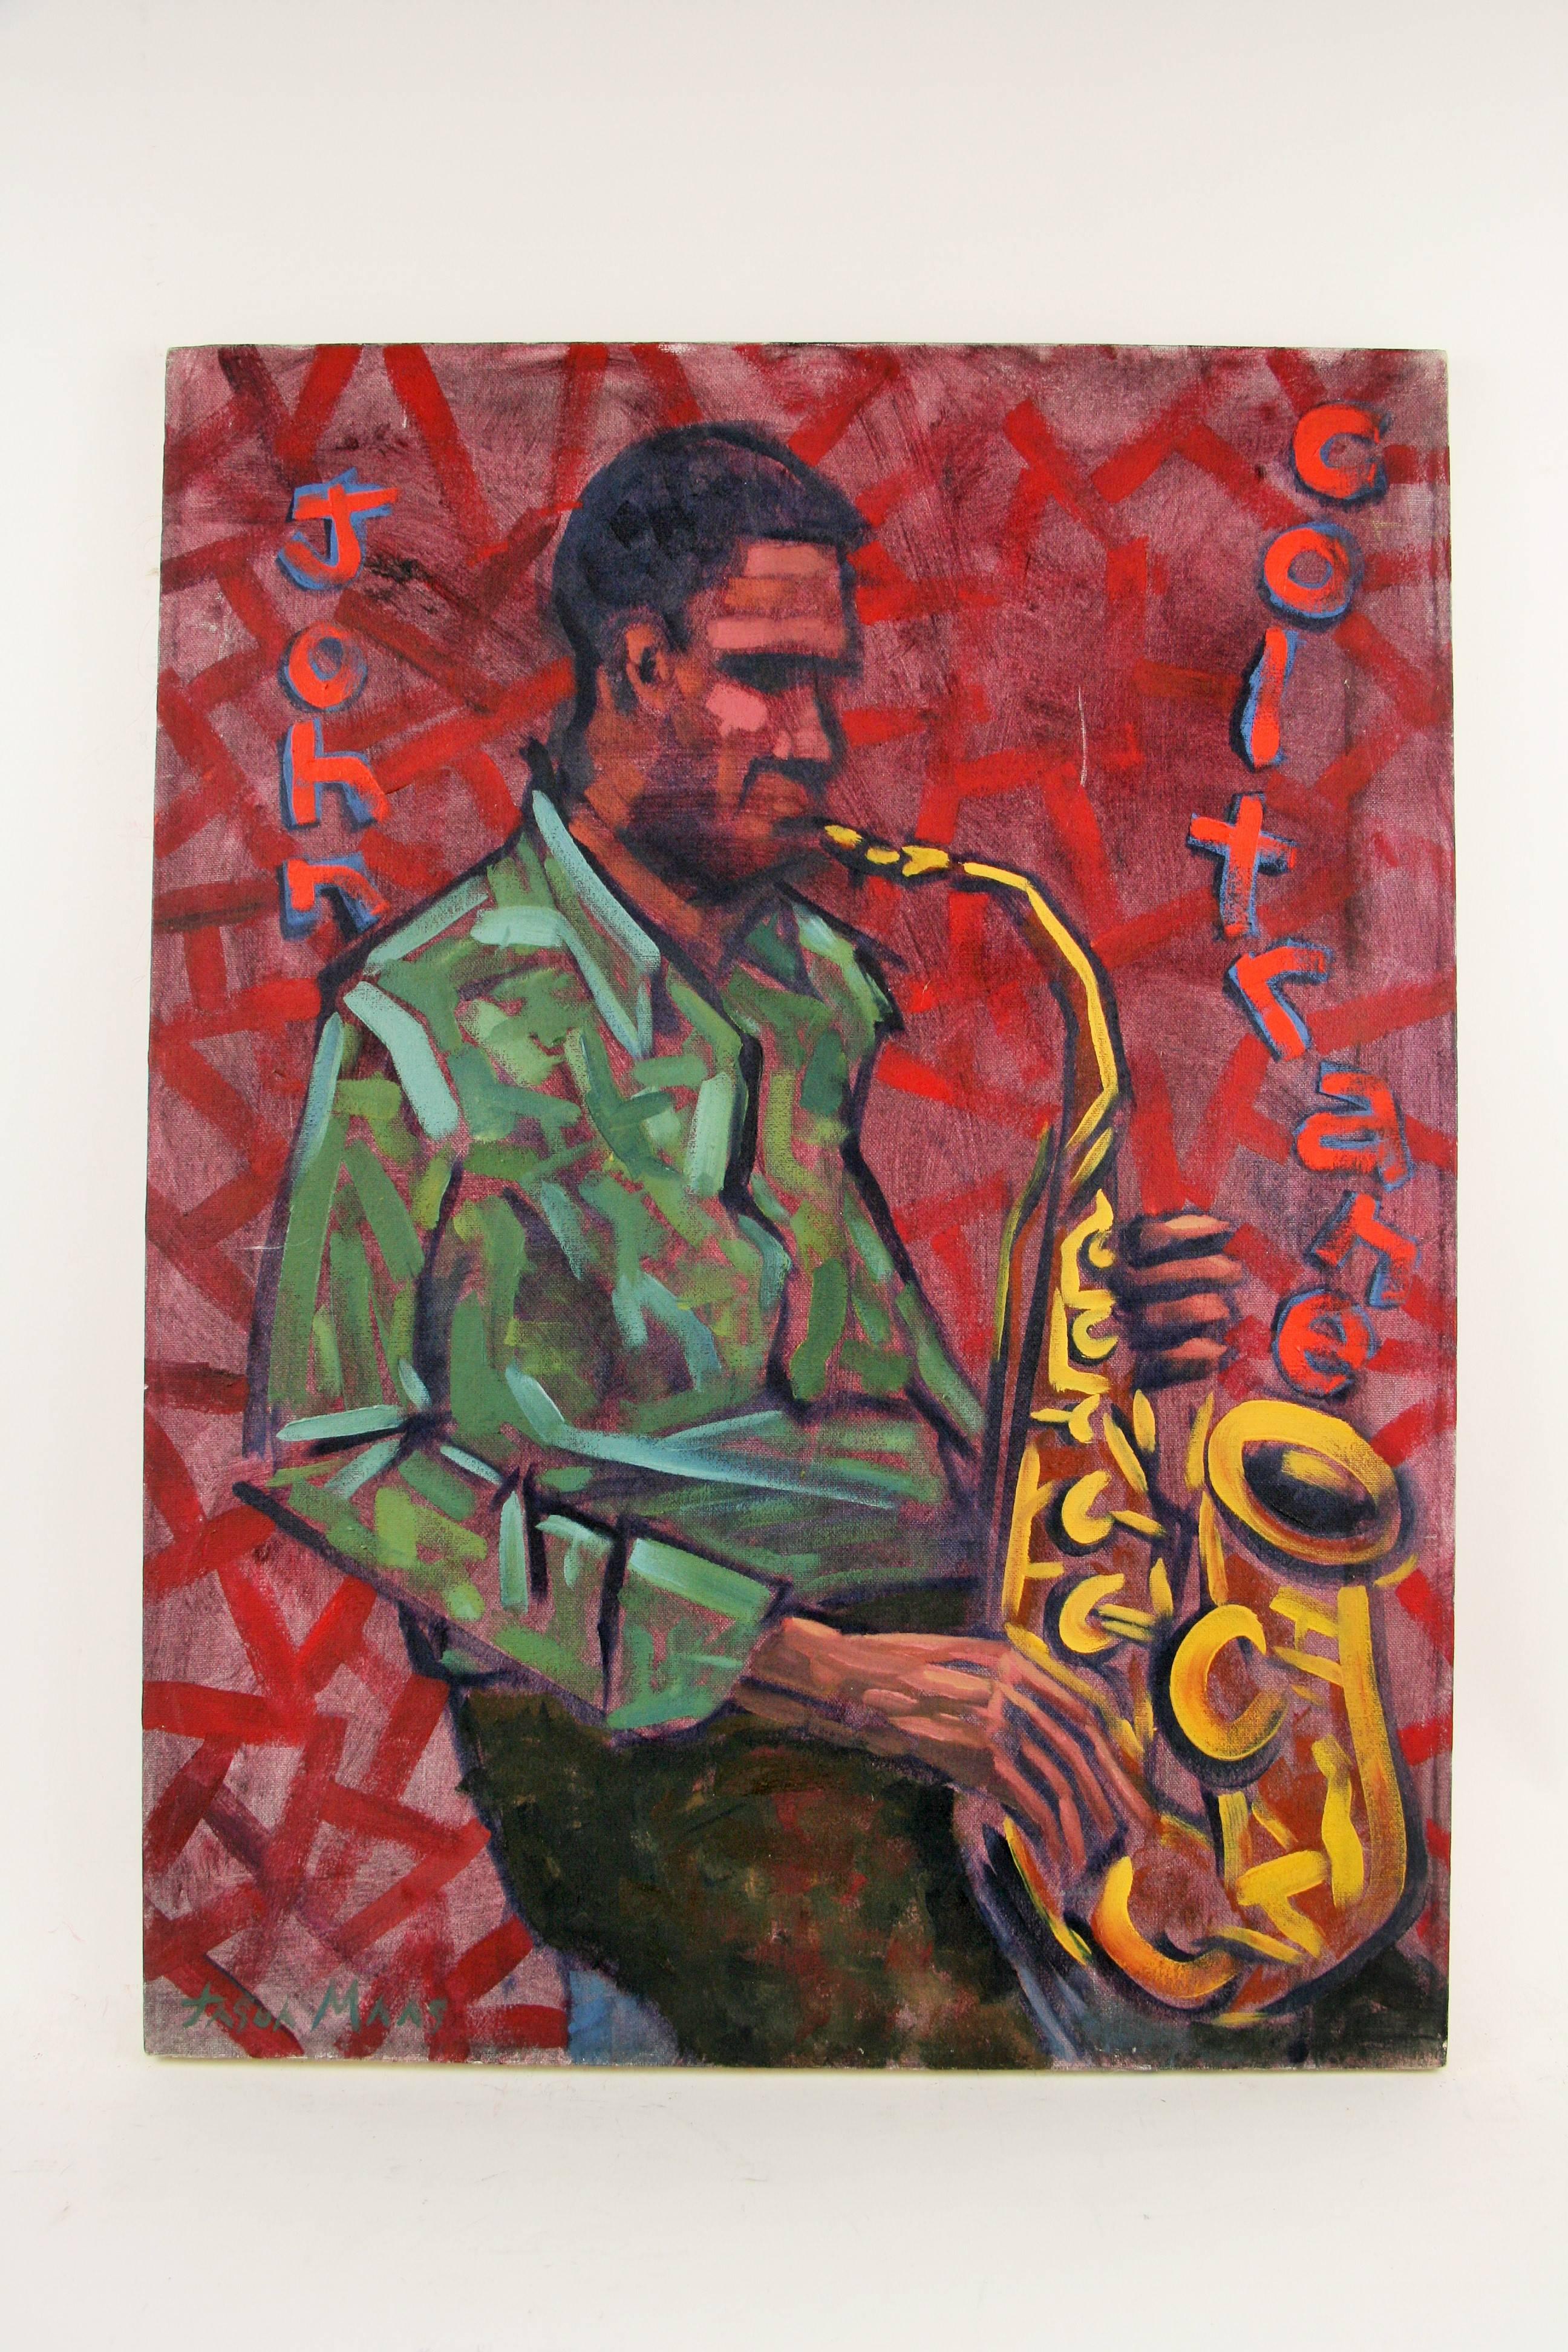 #5-2609   John  Coltrane painting ,acrylic on stretched canvas signed lower right by Jason Manns.
Unframed